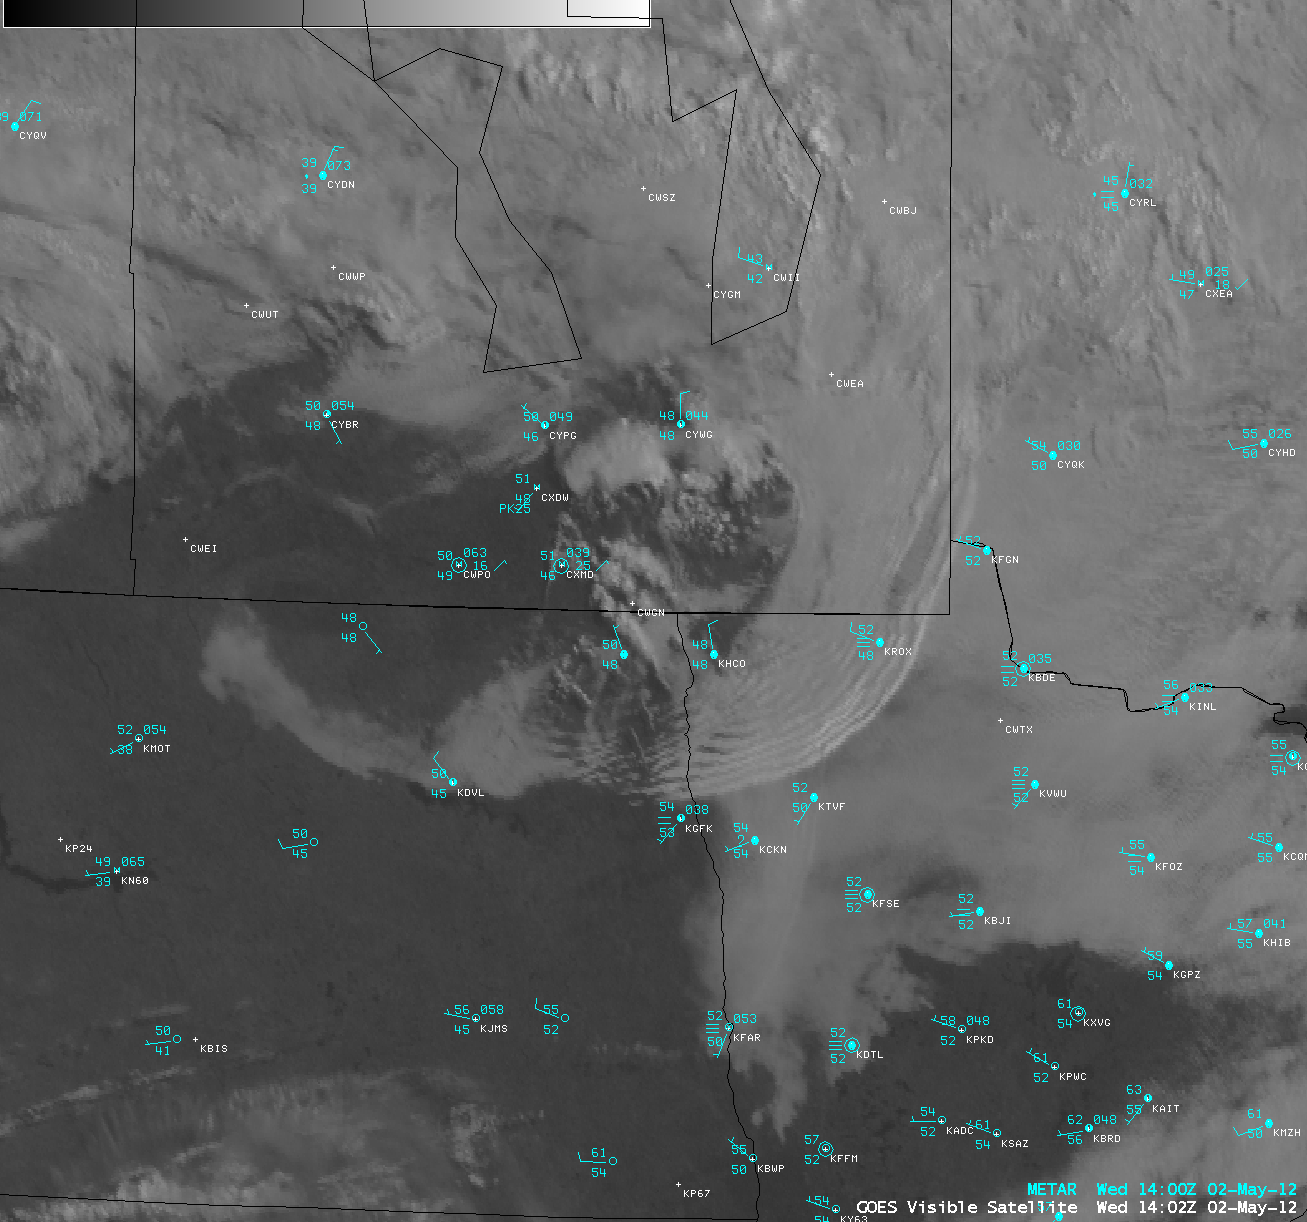 GOES-13 10.7 Âµm IR channel + 0.63 Âµm visible channel images (click image to play animation)